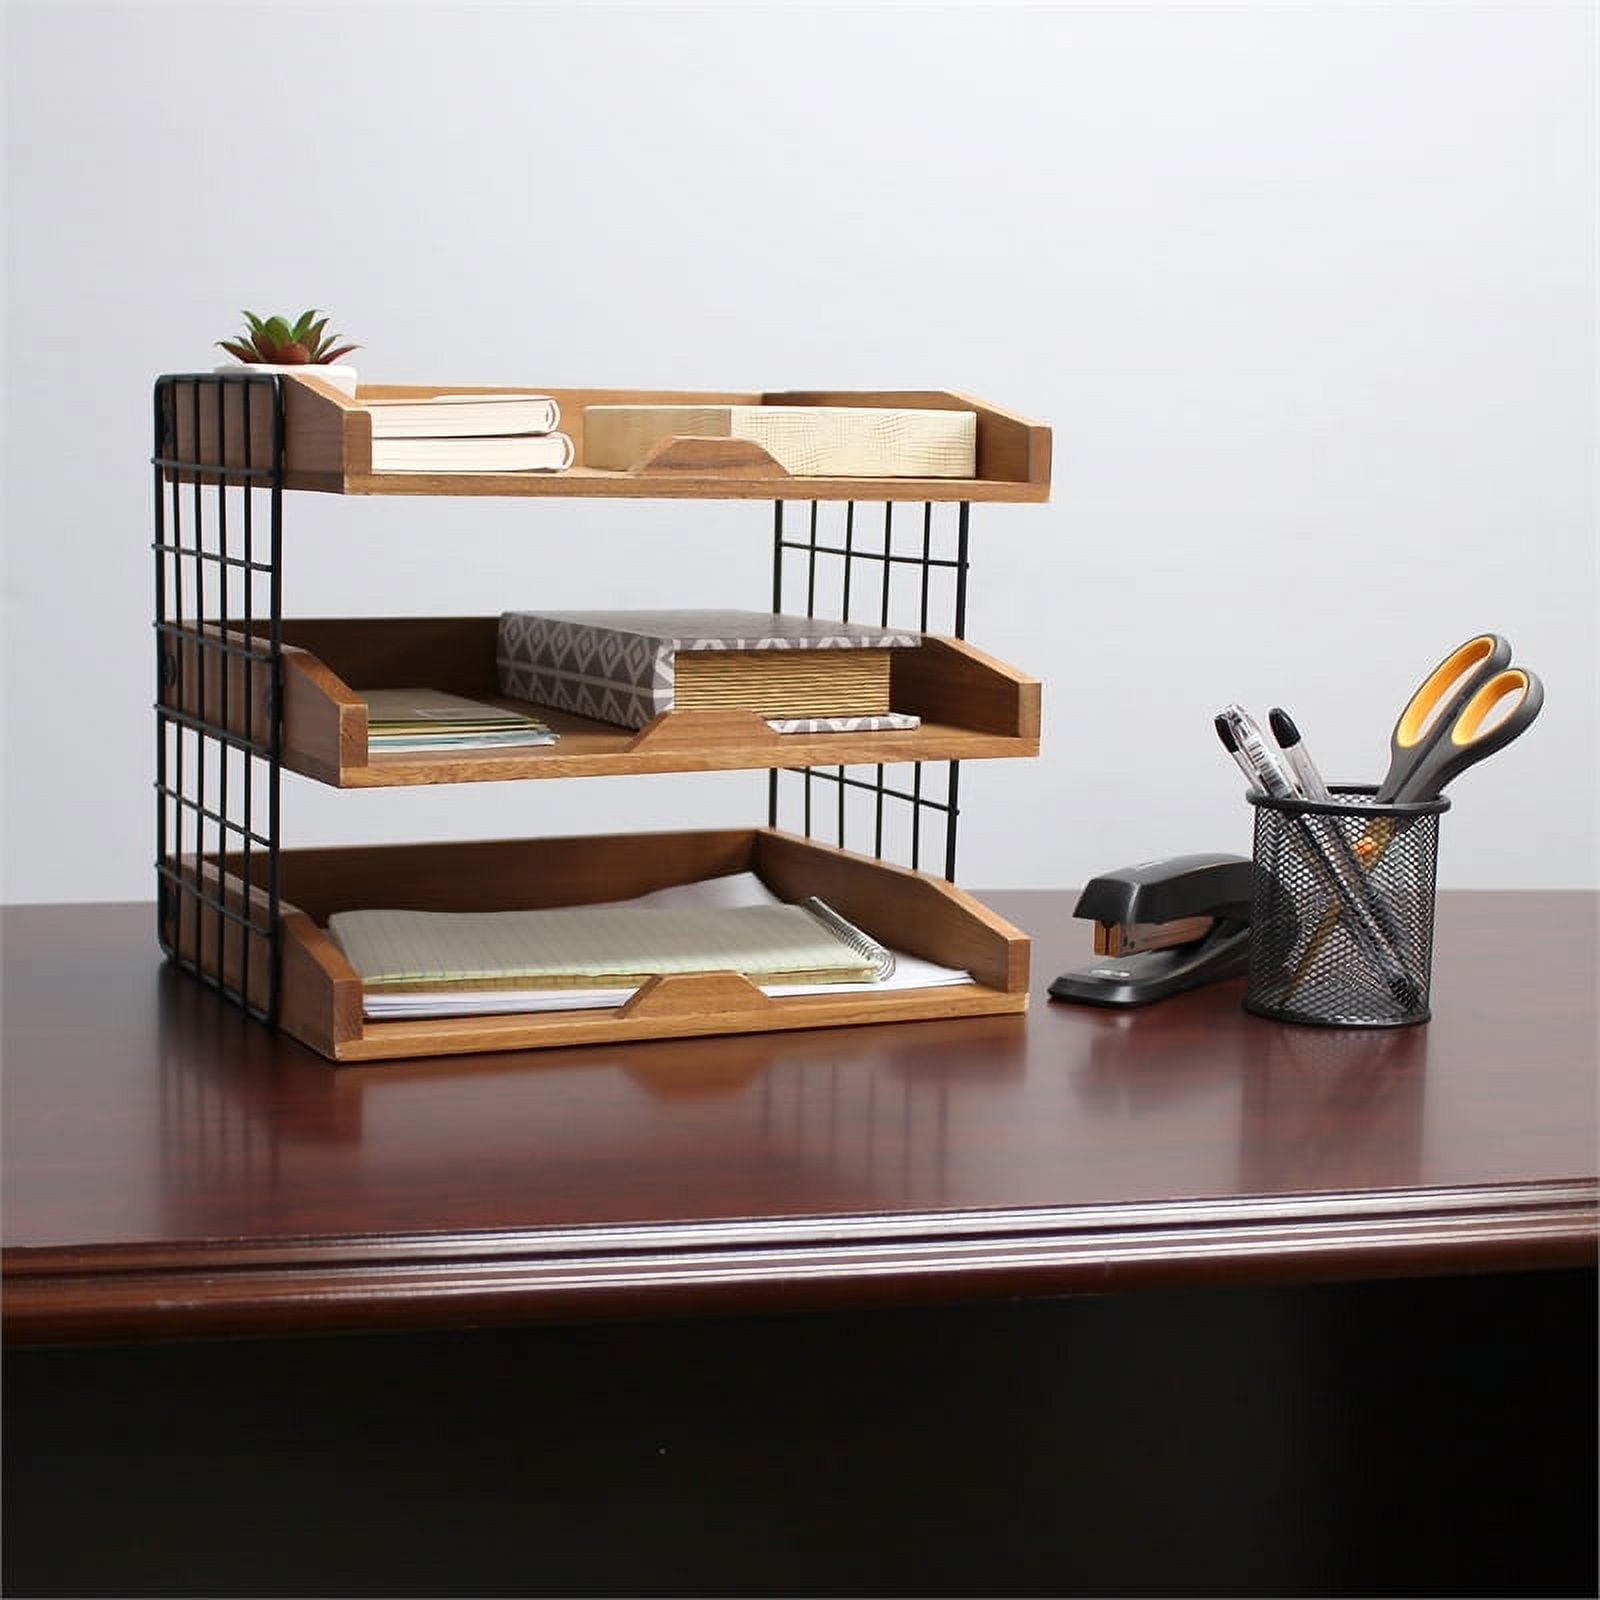 12) 3 Letter Tray Glide Storage with Translucent Trays - WoodDesigns